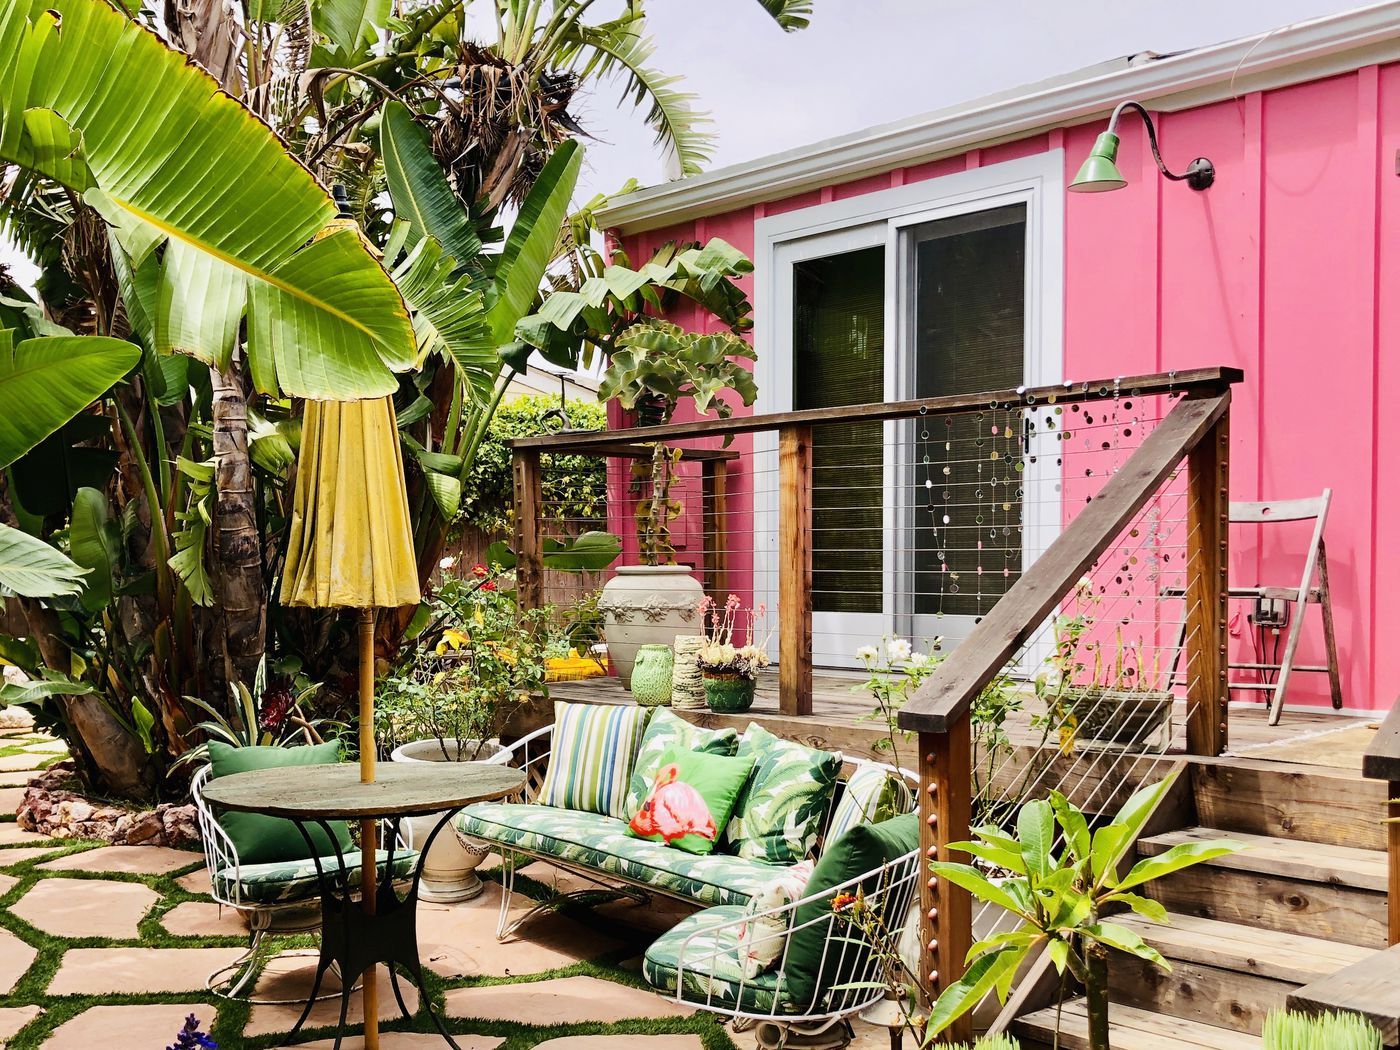 Betsey Johnson's pink mobile home in Malibu is for $1.9M